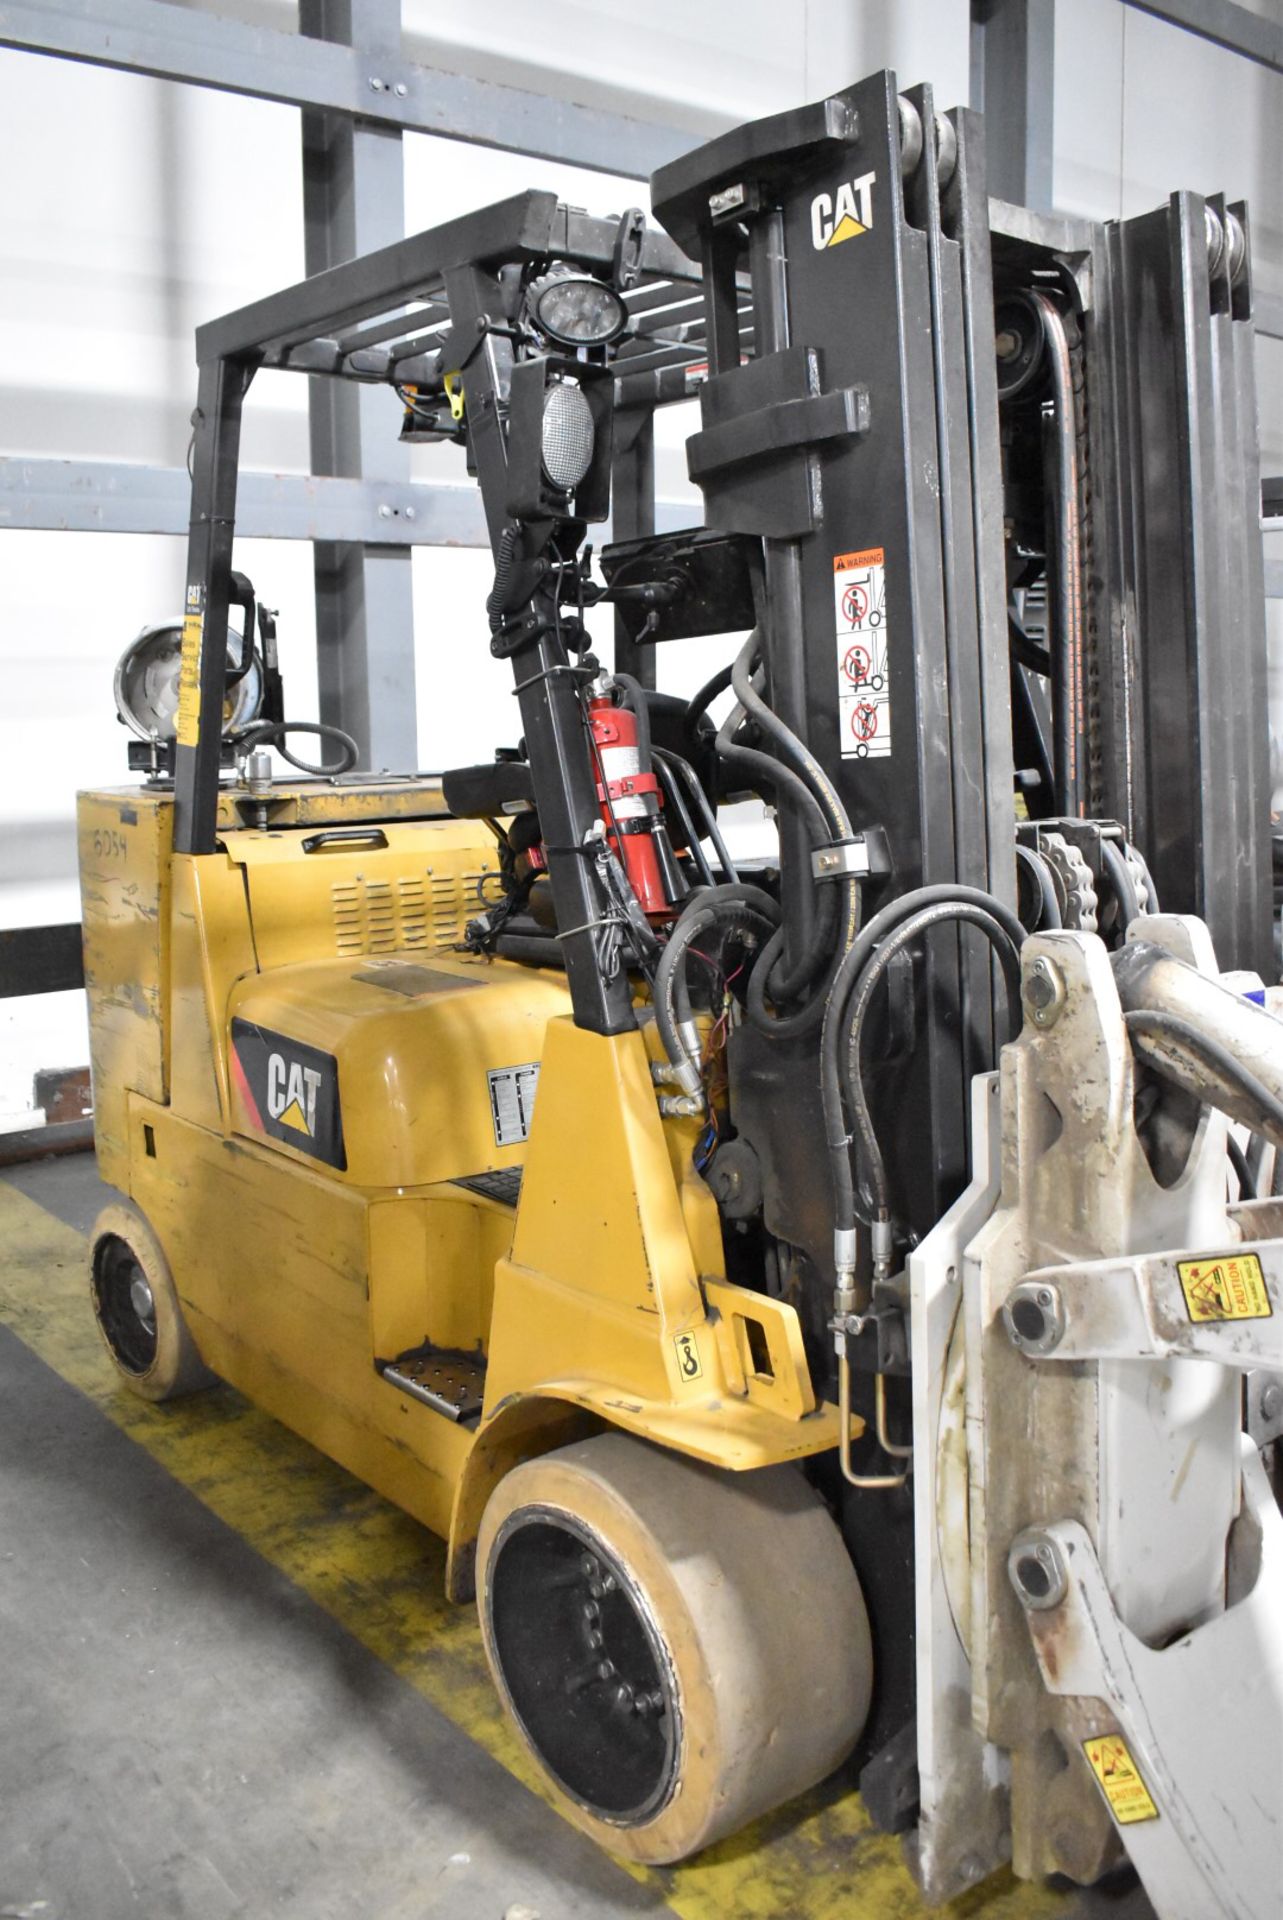 CATERPILLAR (2015) GC55KPRSTR 7,000 LBS. CAPACITY LPG FORKLIFT WITH 172" MAX VERTICAL REACH, 3-STAGE - Image 5 of 12